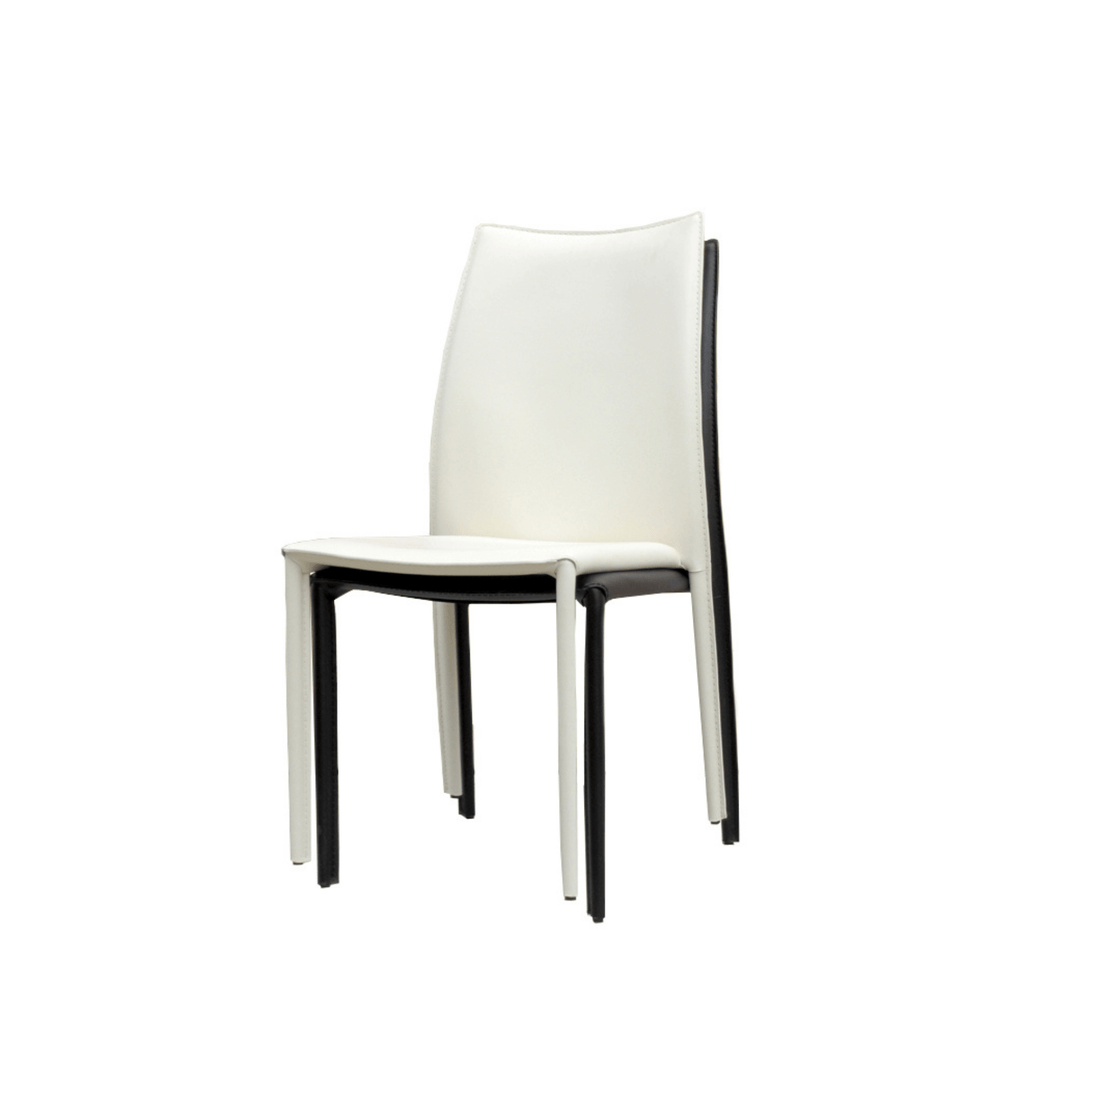 Dining chair PARKER｜ダイニングチェア パーカー｜ブラック